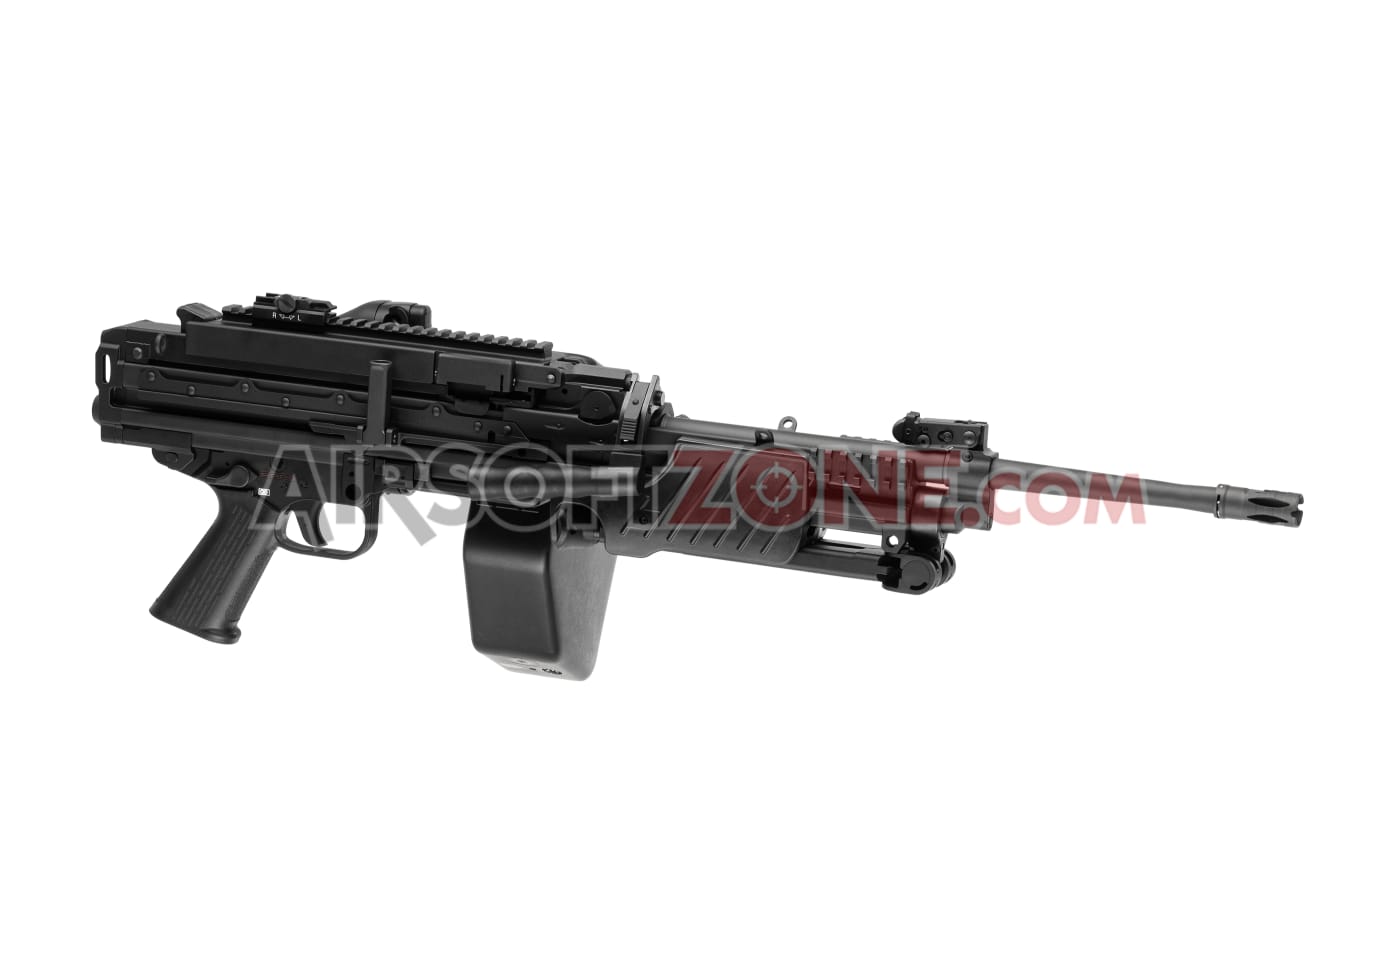 MGL – AIRSOFT Z ONE